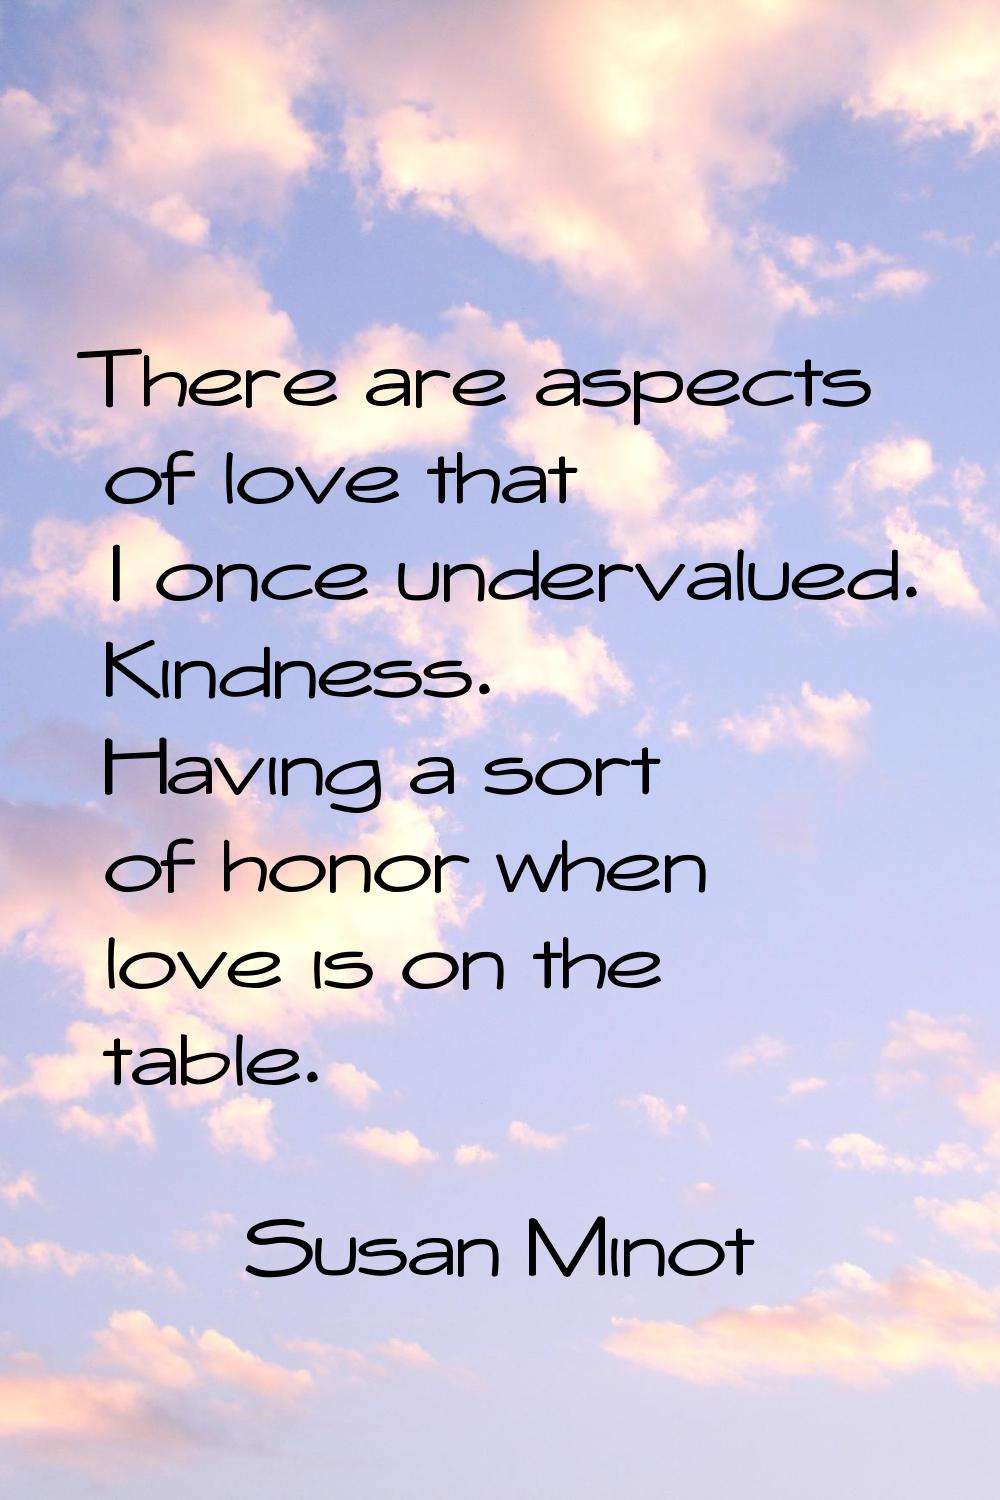 There are aspects of love that I once undervalued. Kindness. Having a sort of honor when love is on